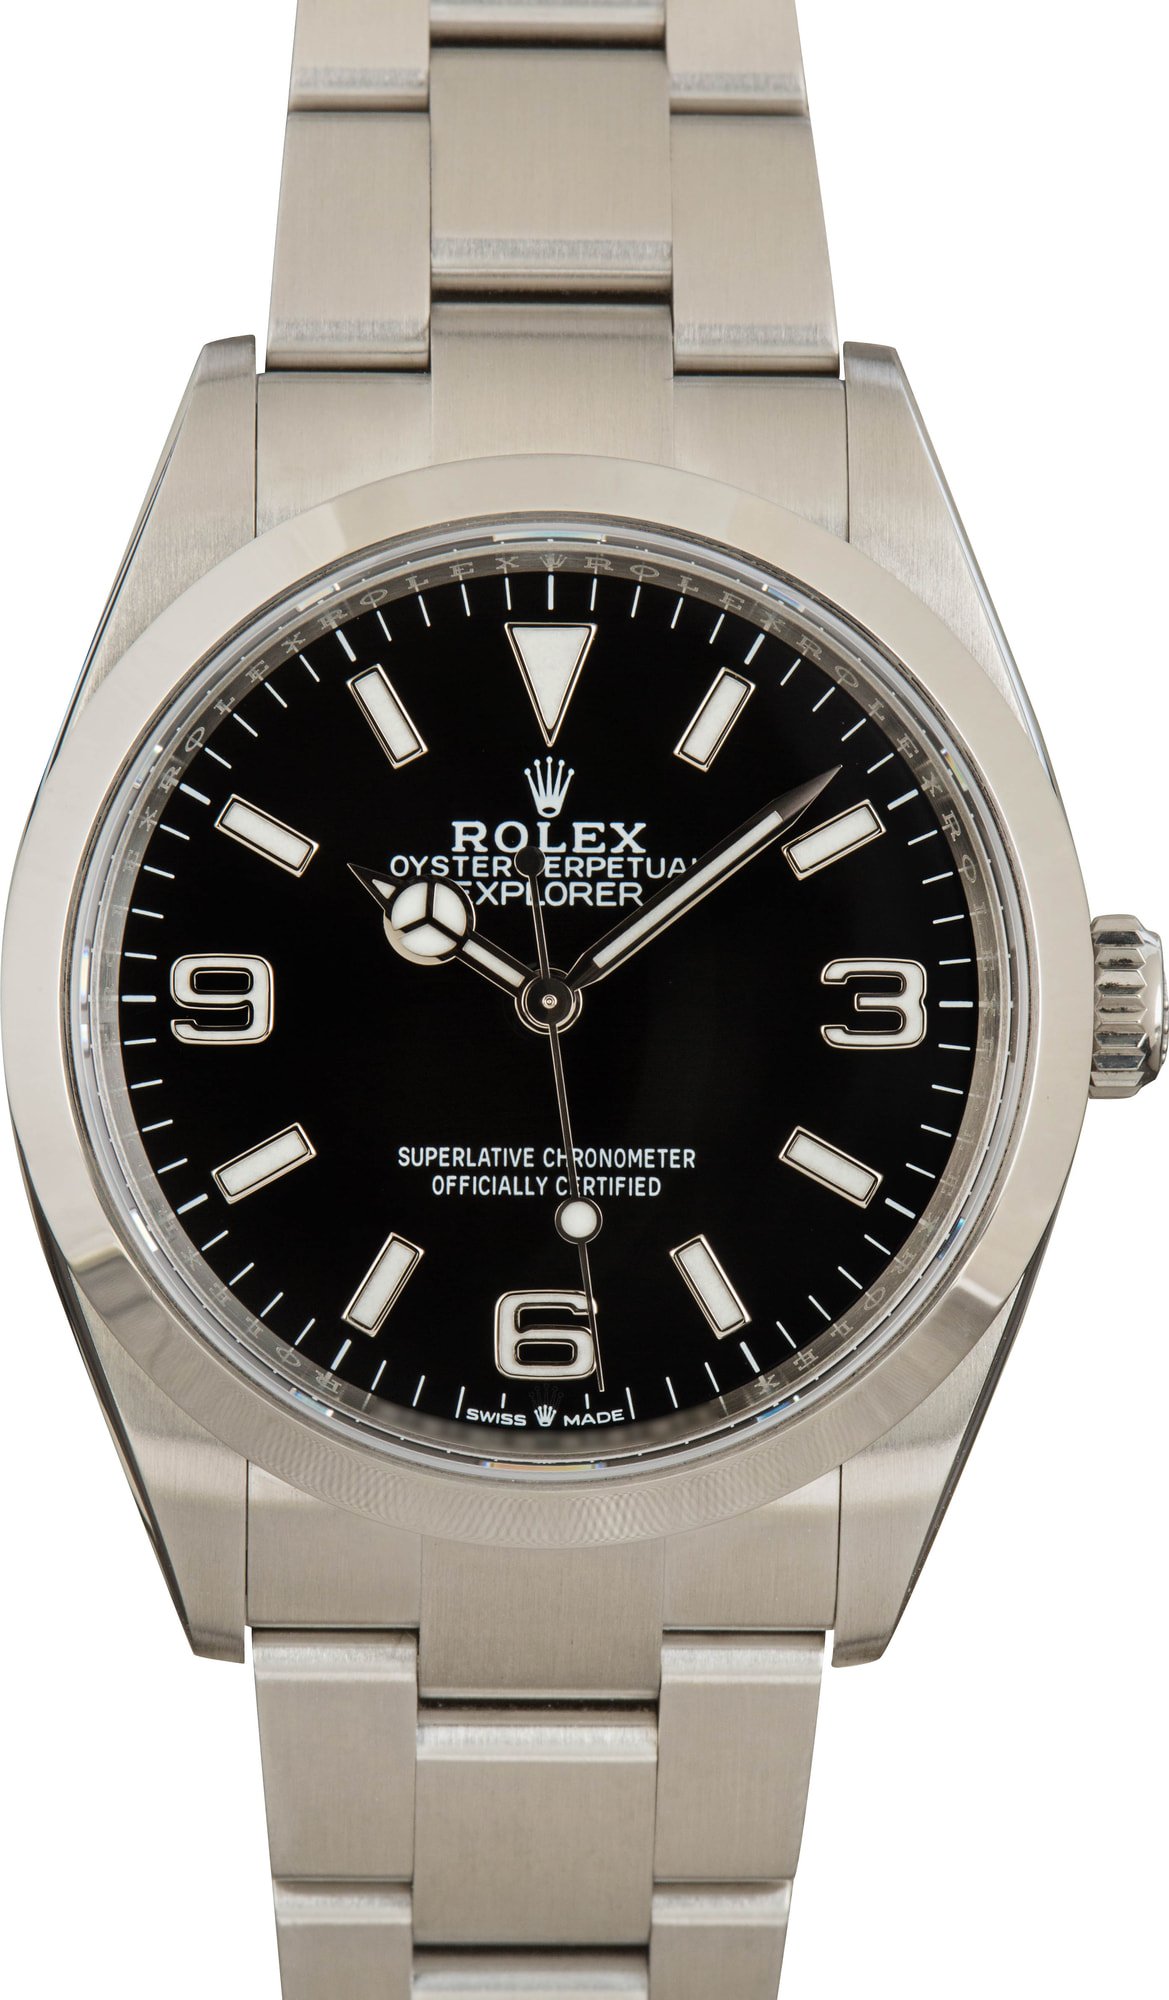 Used Rolex Prices Show Signs of Stabilising | BoF